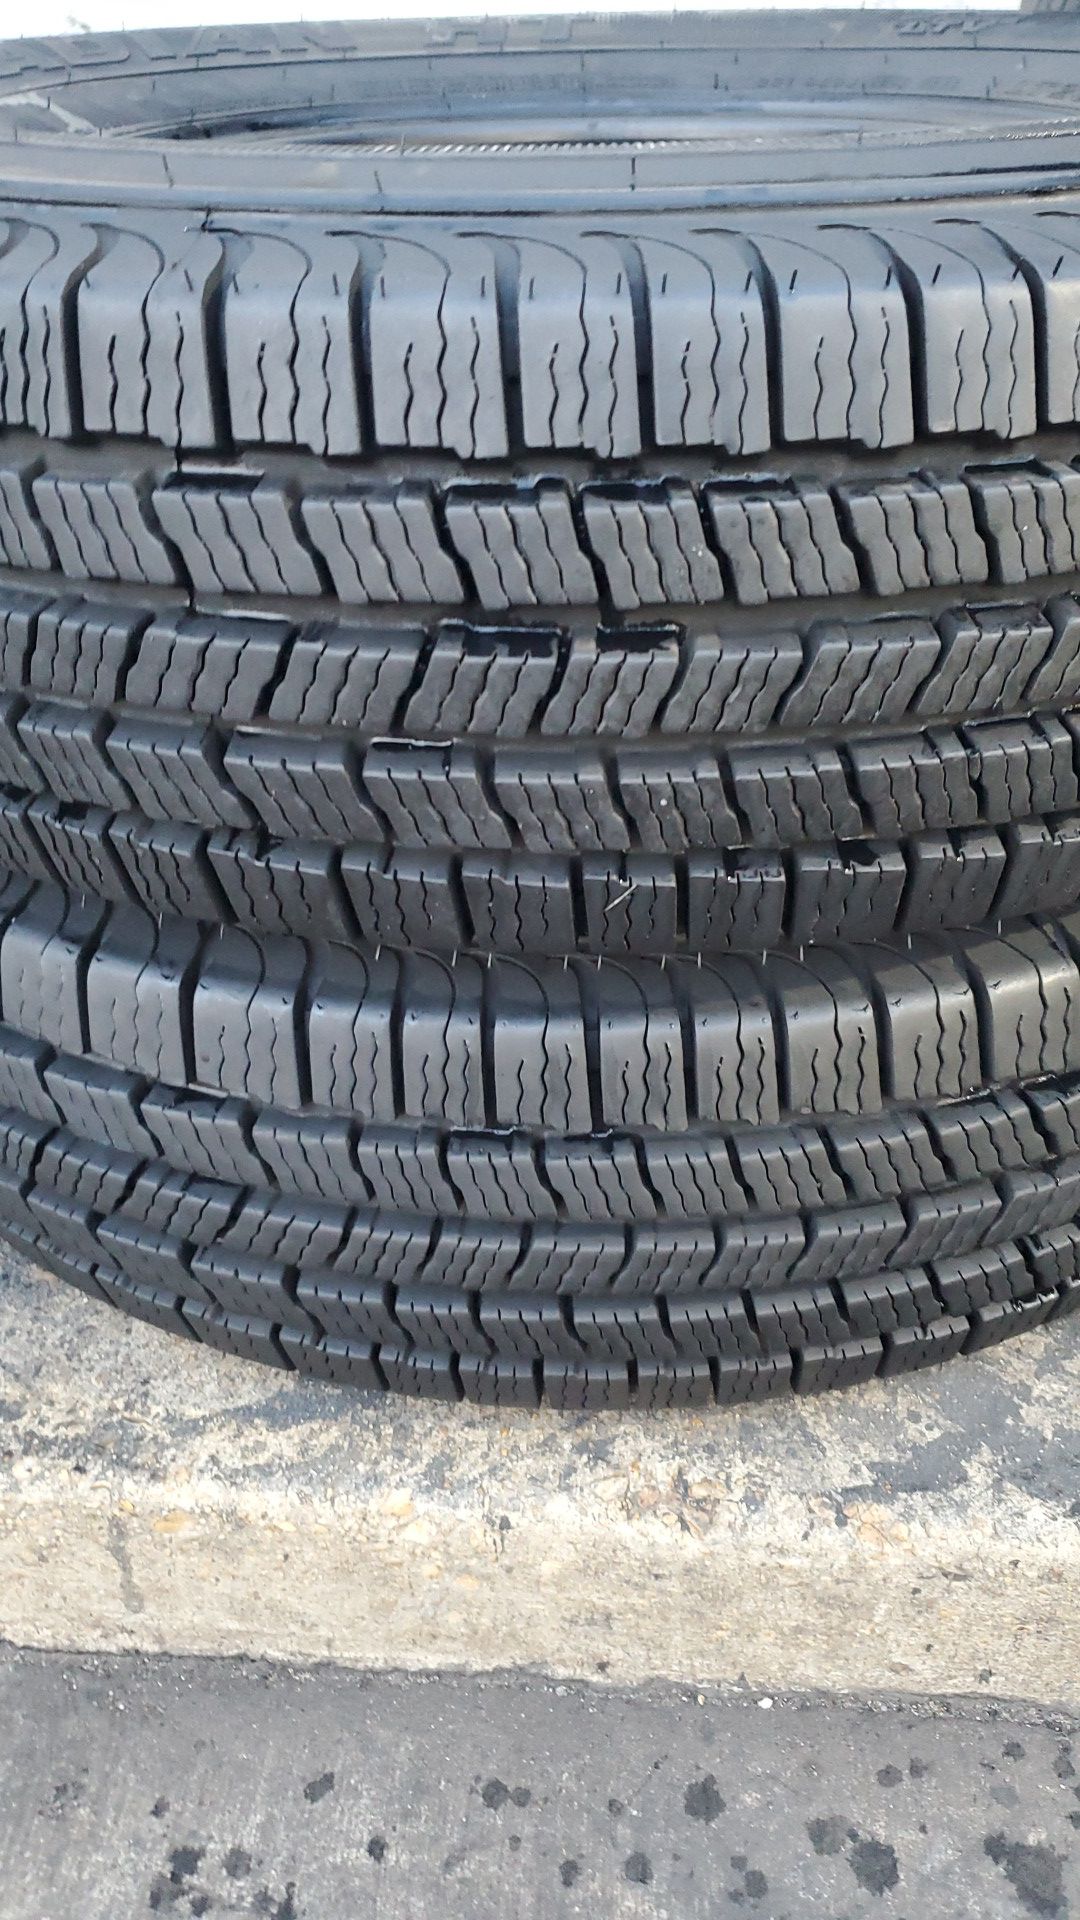 Two very good NEXEN tires for sale LT 235/85/16